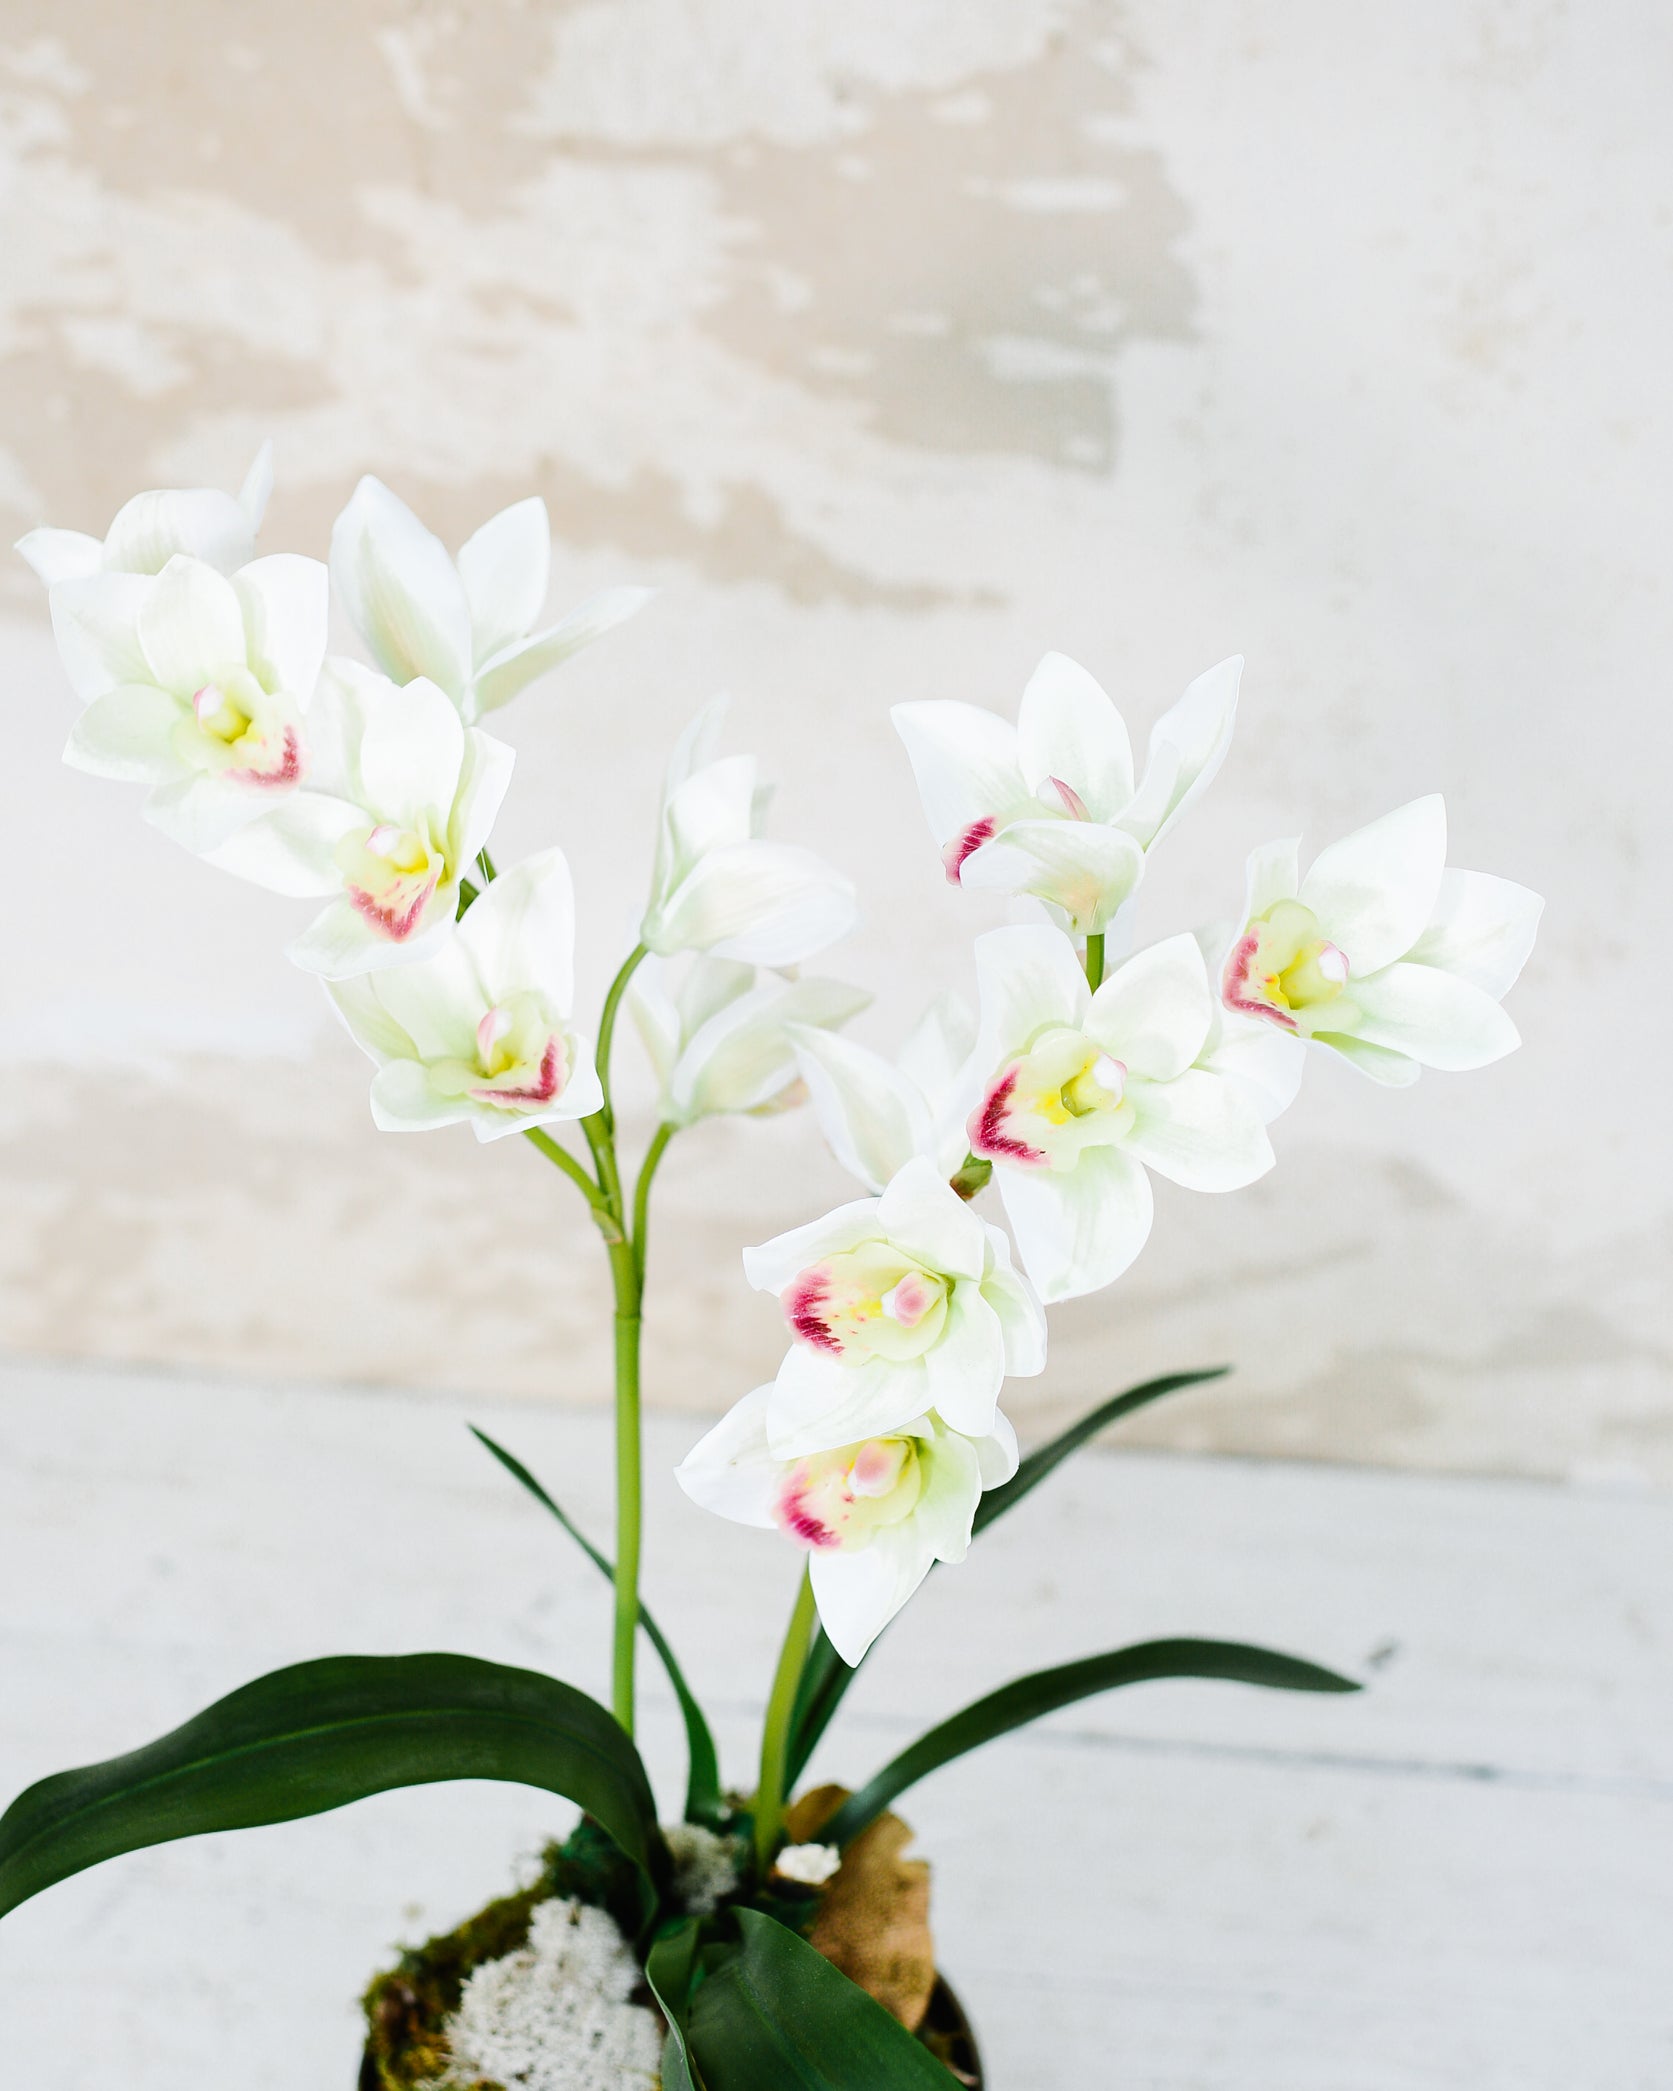 Double White Cymbidium Orchid Drop In